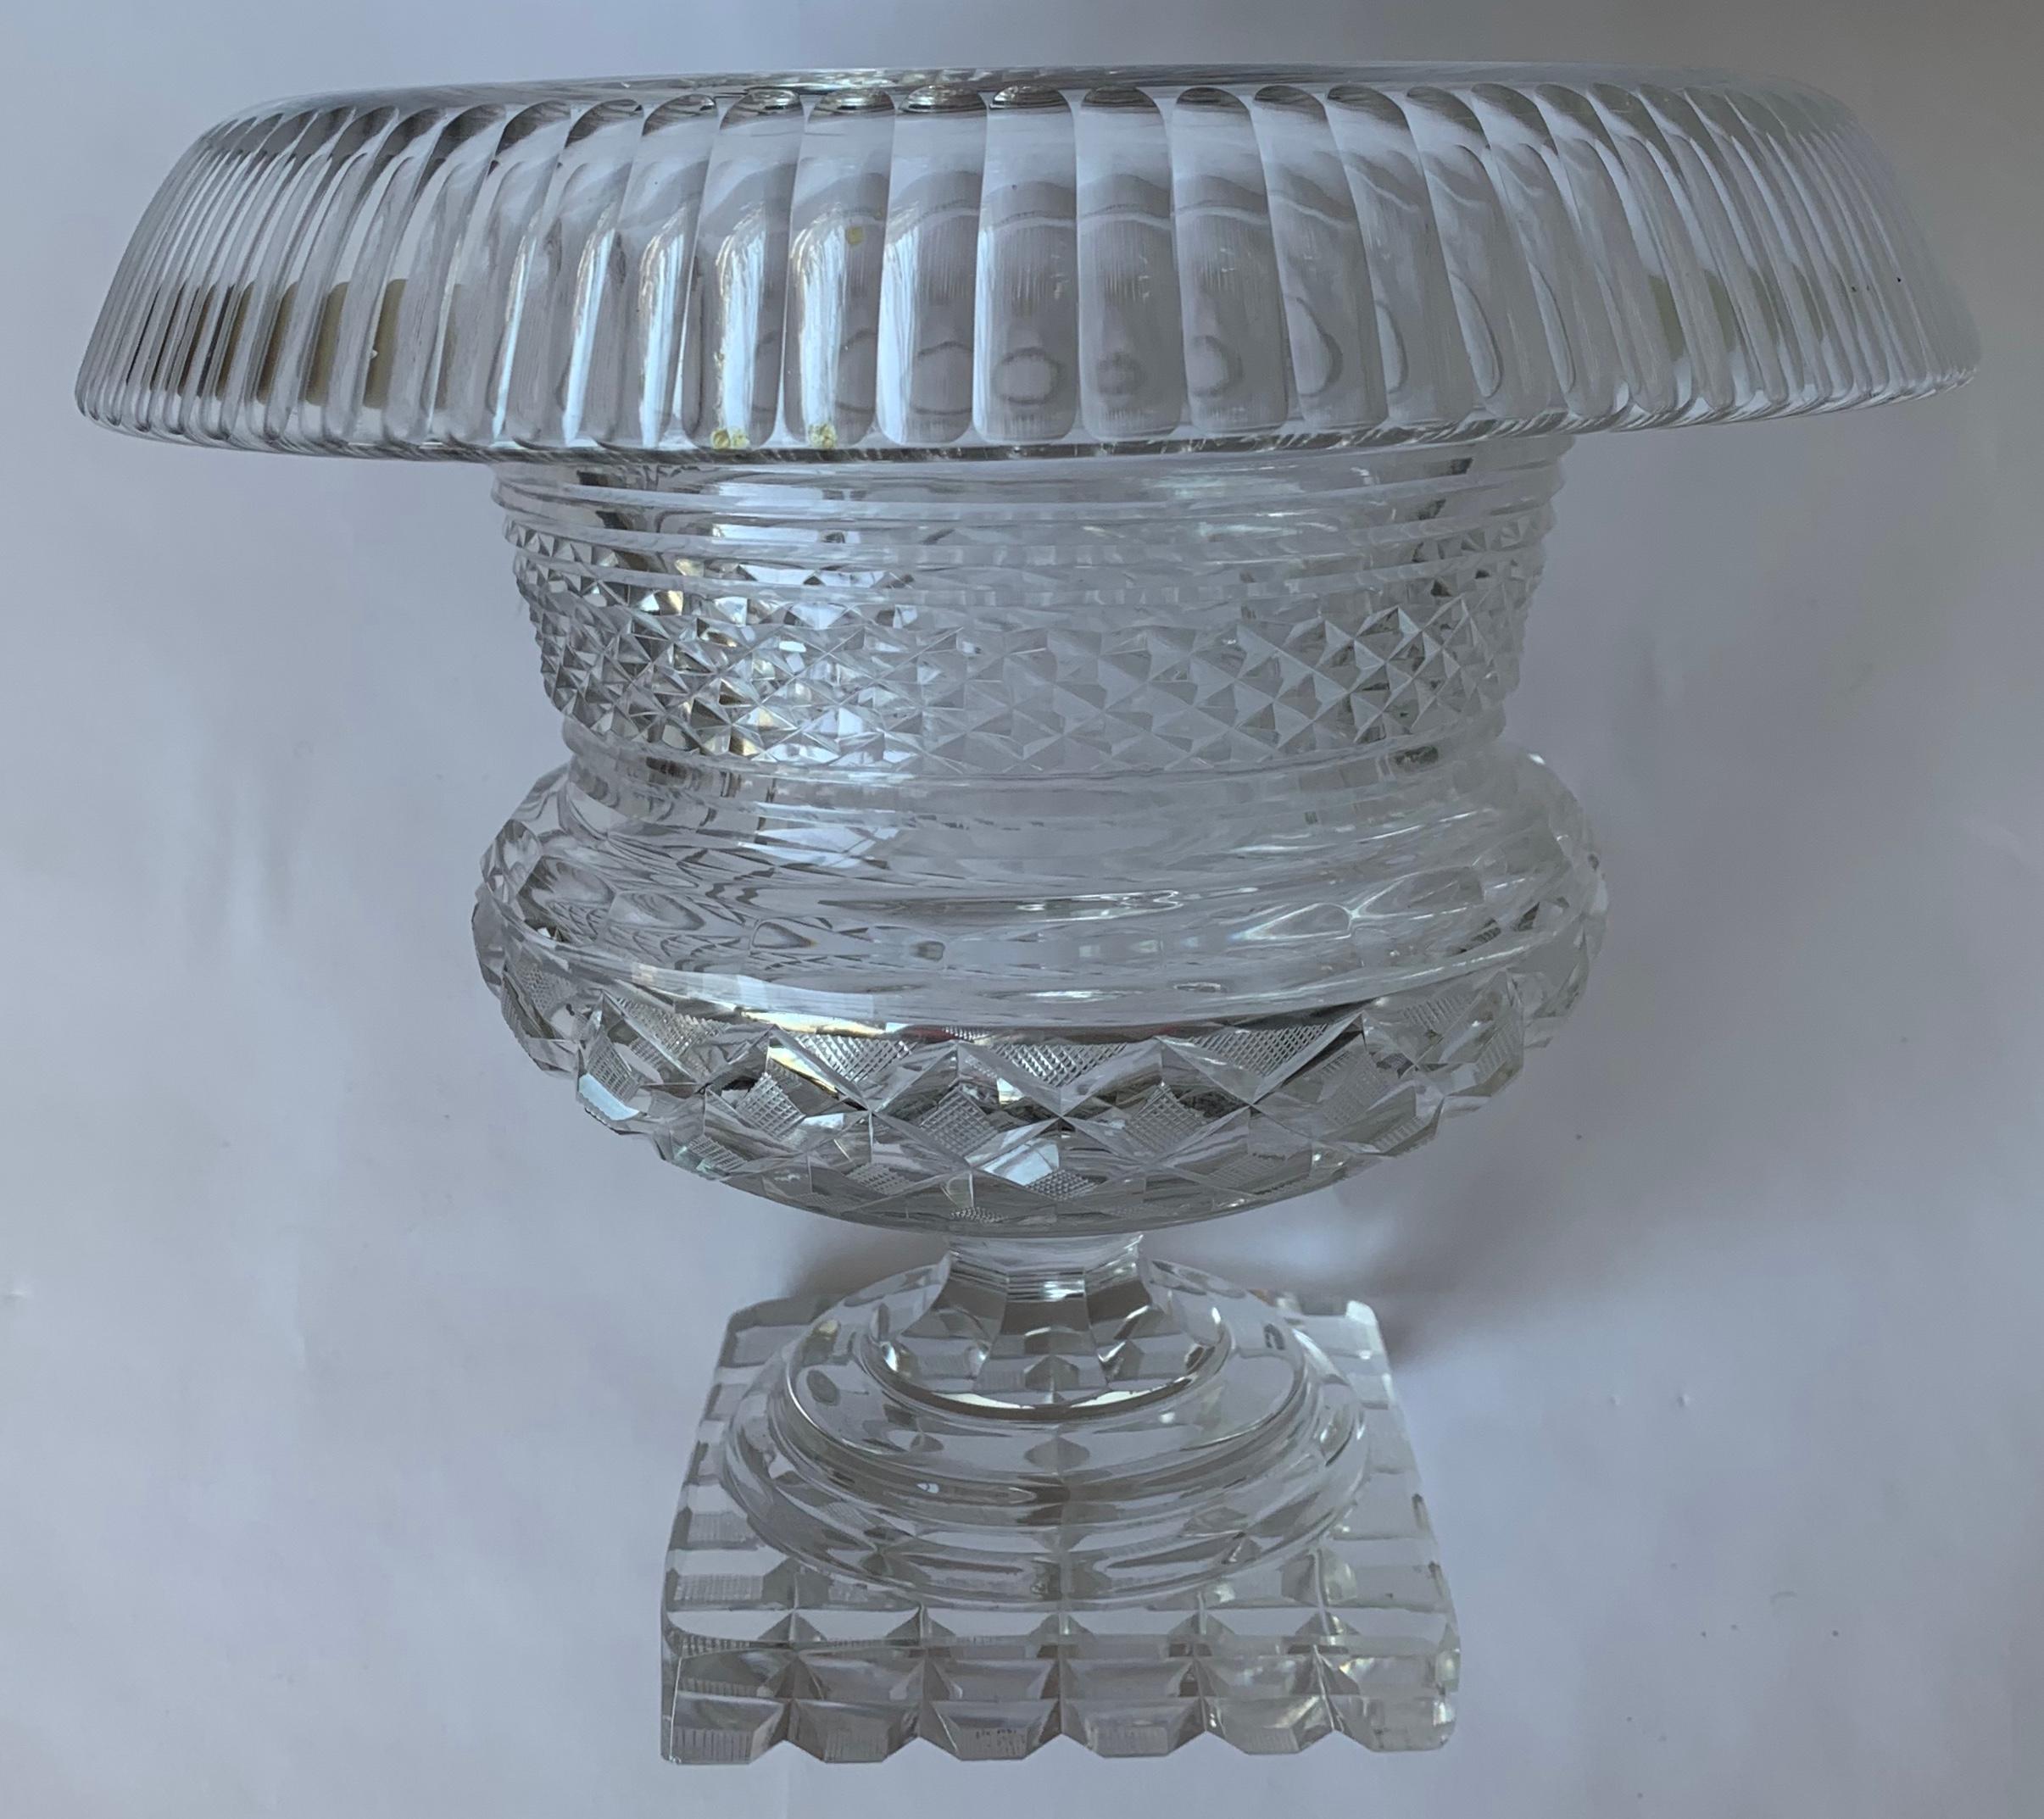 1820er Jahre Anglo-Irish Cut Crystal Rolled Edge Footed Bowl im Angebot 2